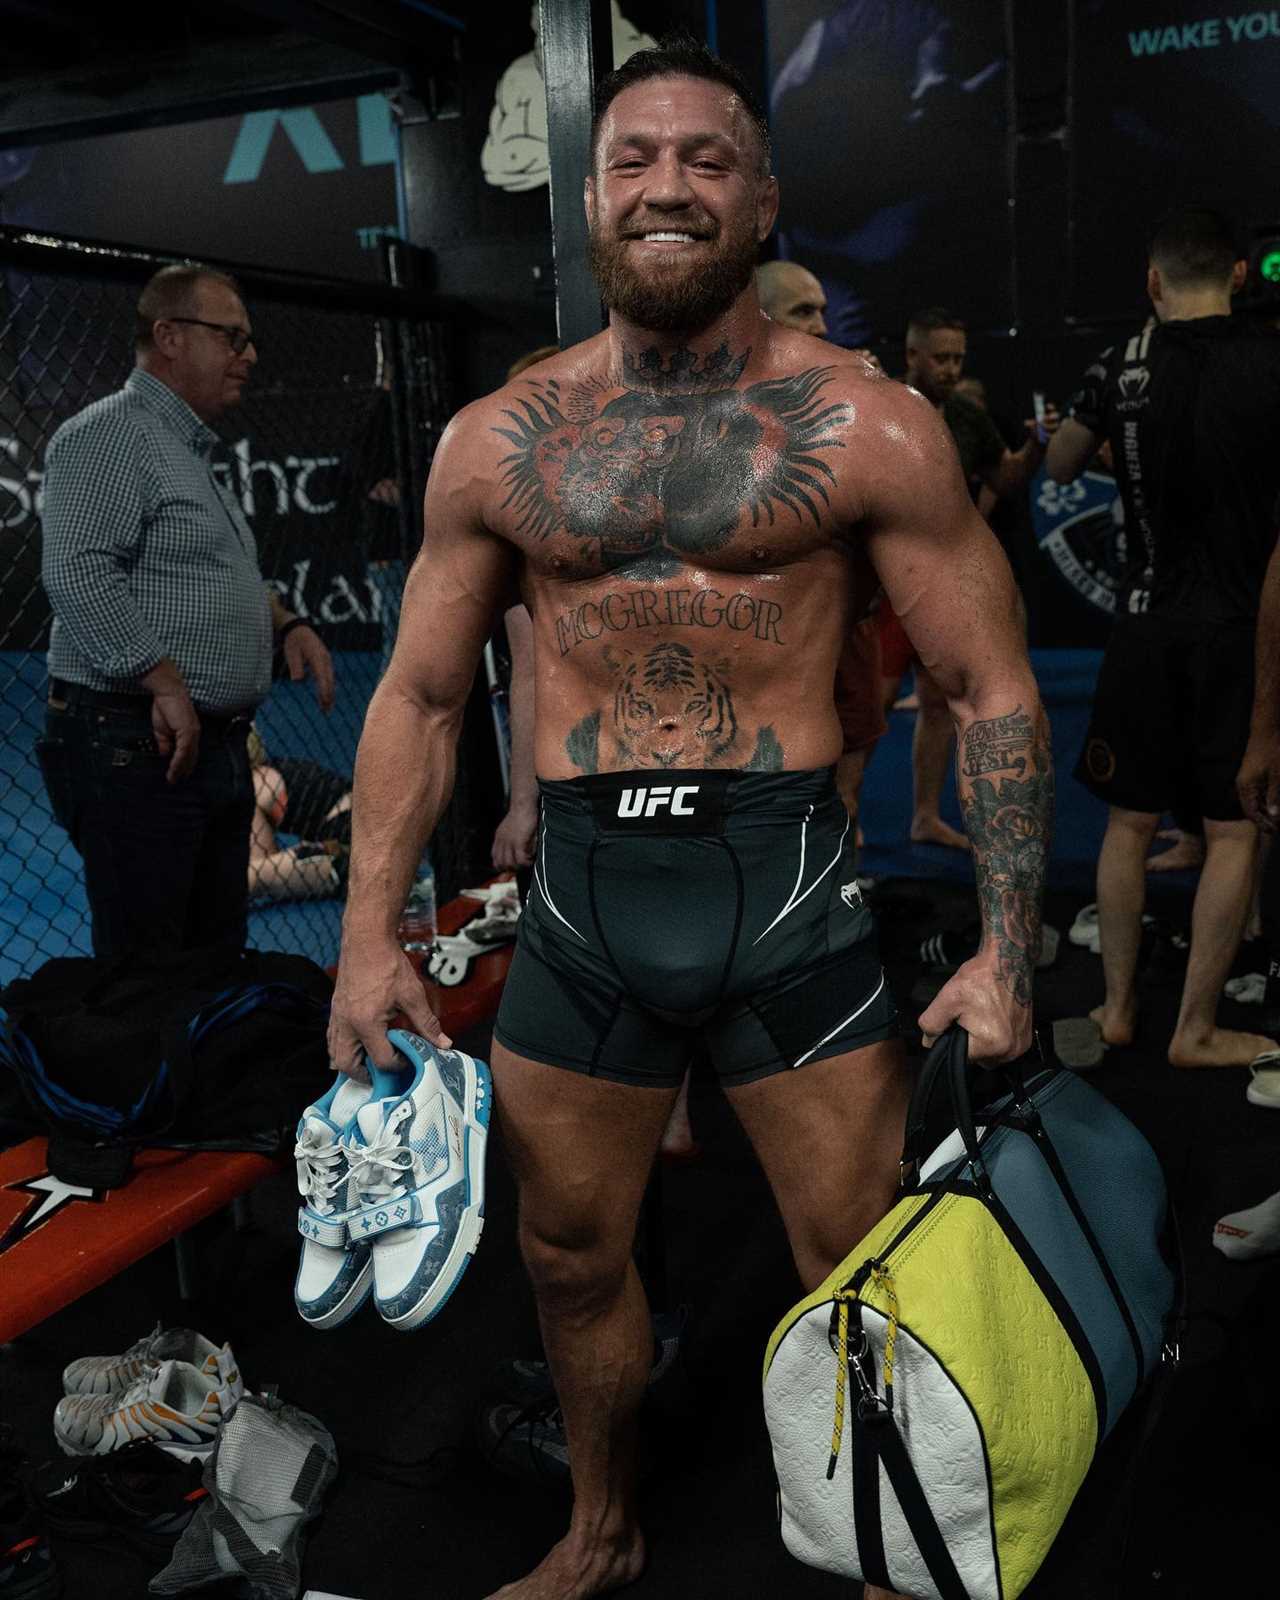 After being left with marks from UFC training, Conor McGregor was compared to the 140st GORILLA coach